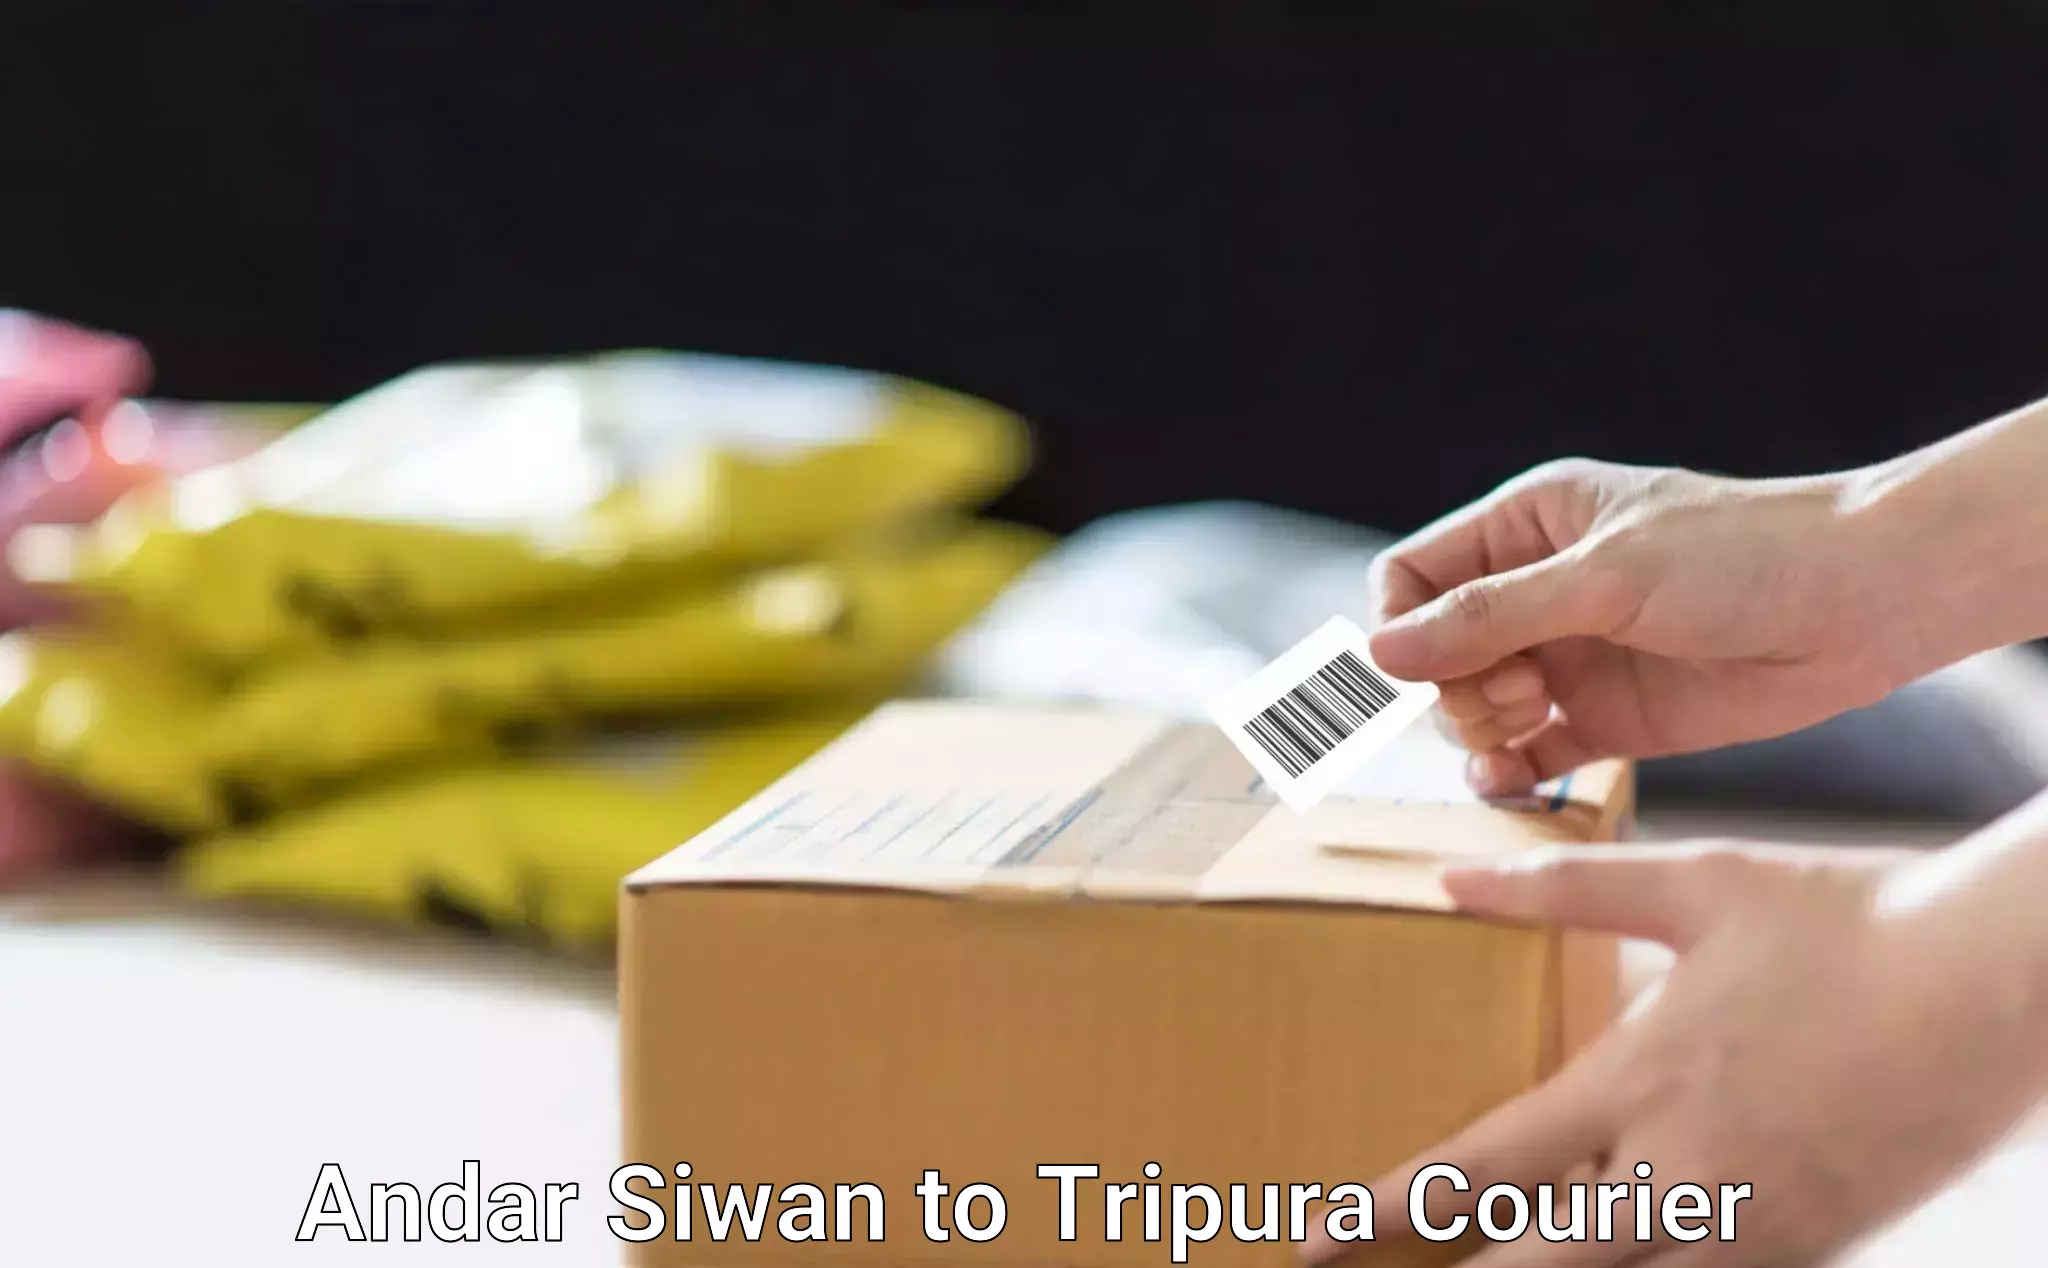 Trusted relocation experts in Andar Siwan to Udaipur Tripura